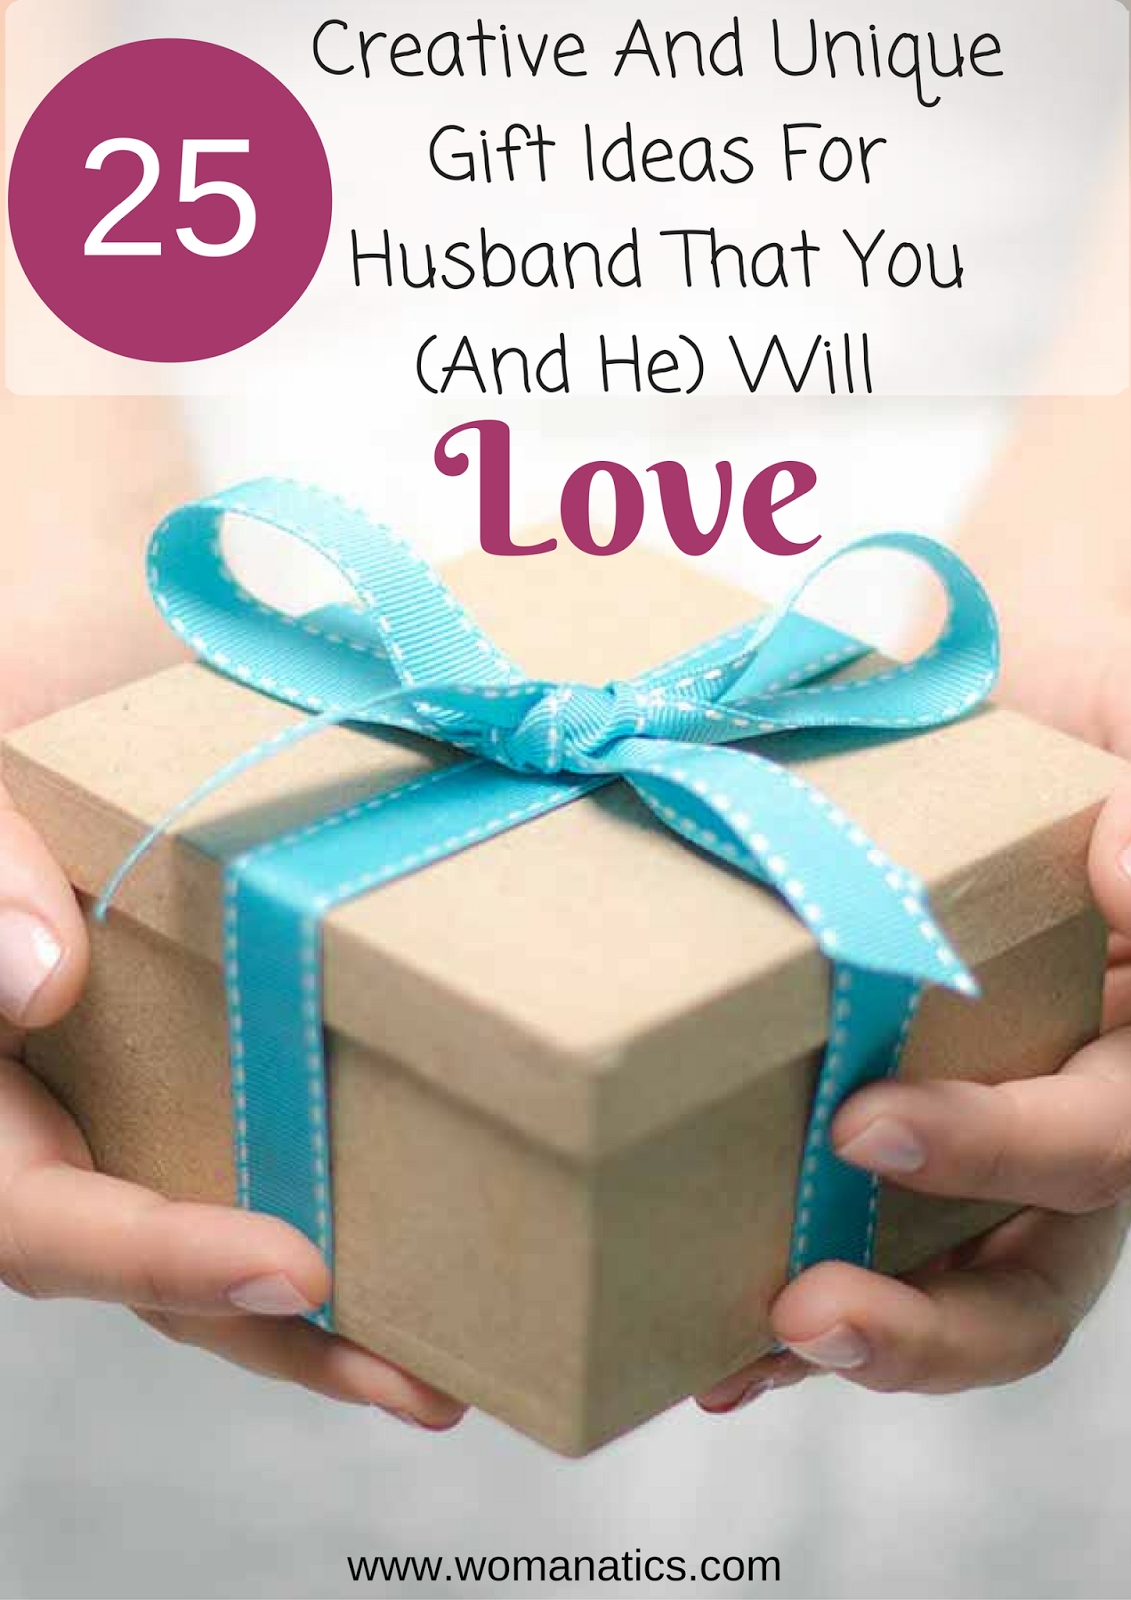 10 Amazing Creative Birthday Ideas For Husband 25 creative and unique gift ideas for husbands birthday that you 2022